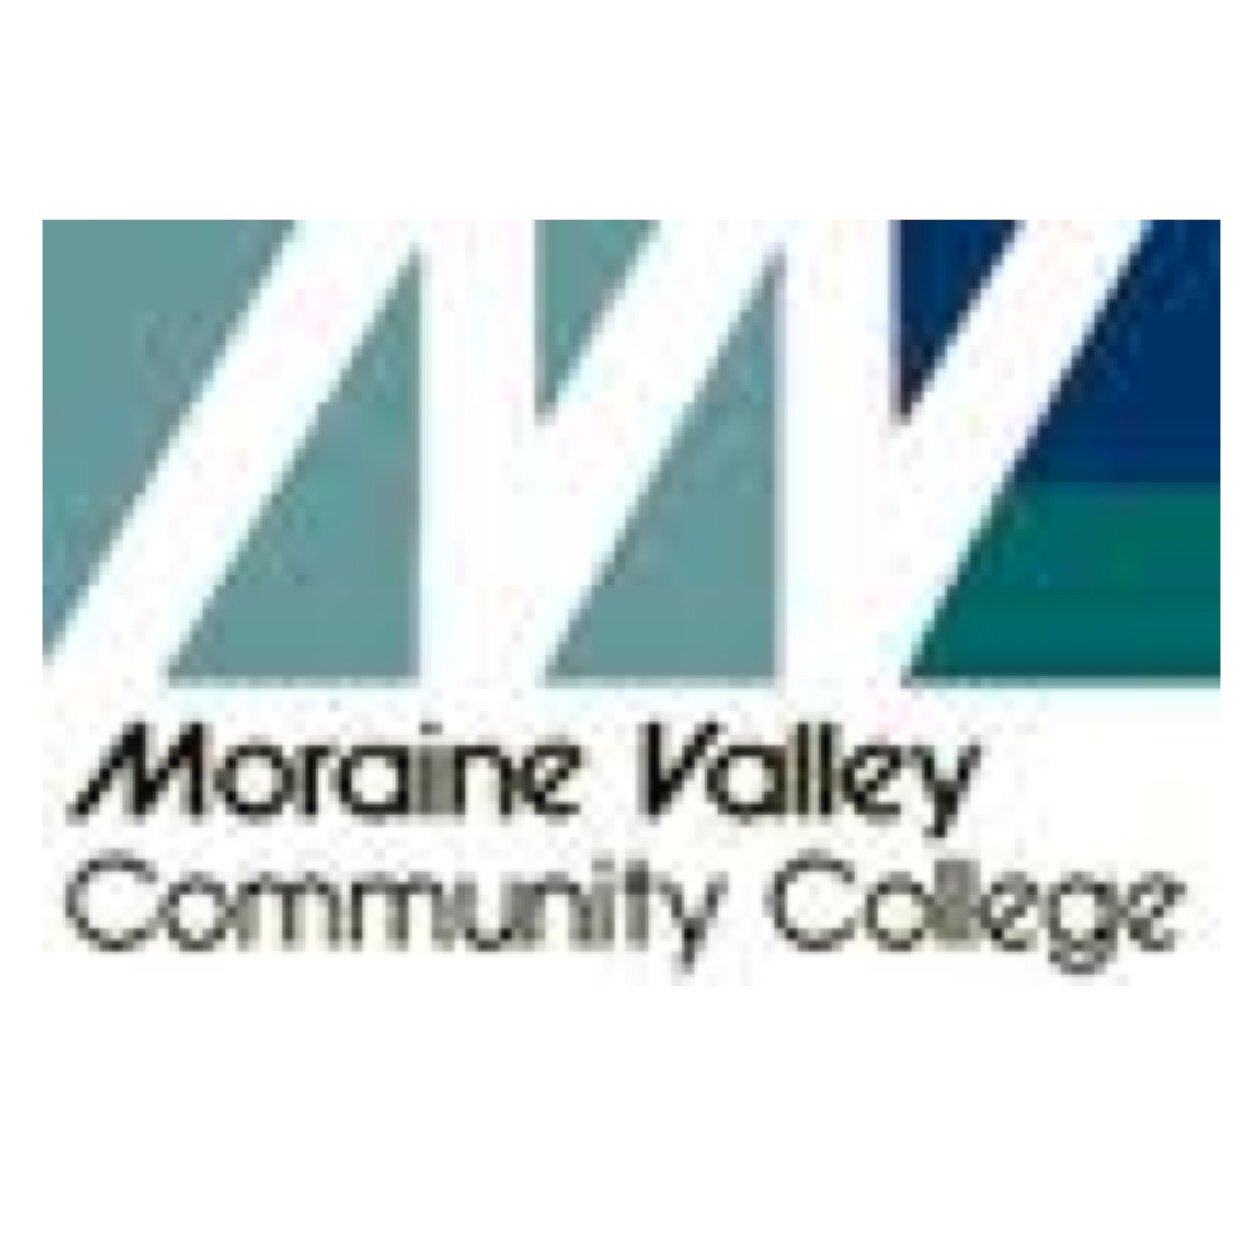 Moraine Valley Community College crushes.